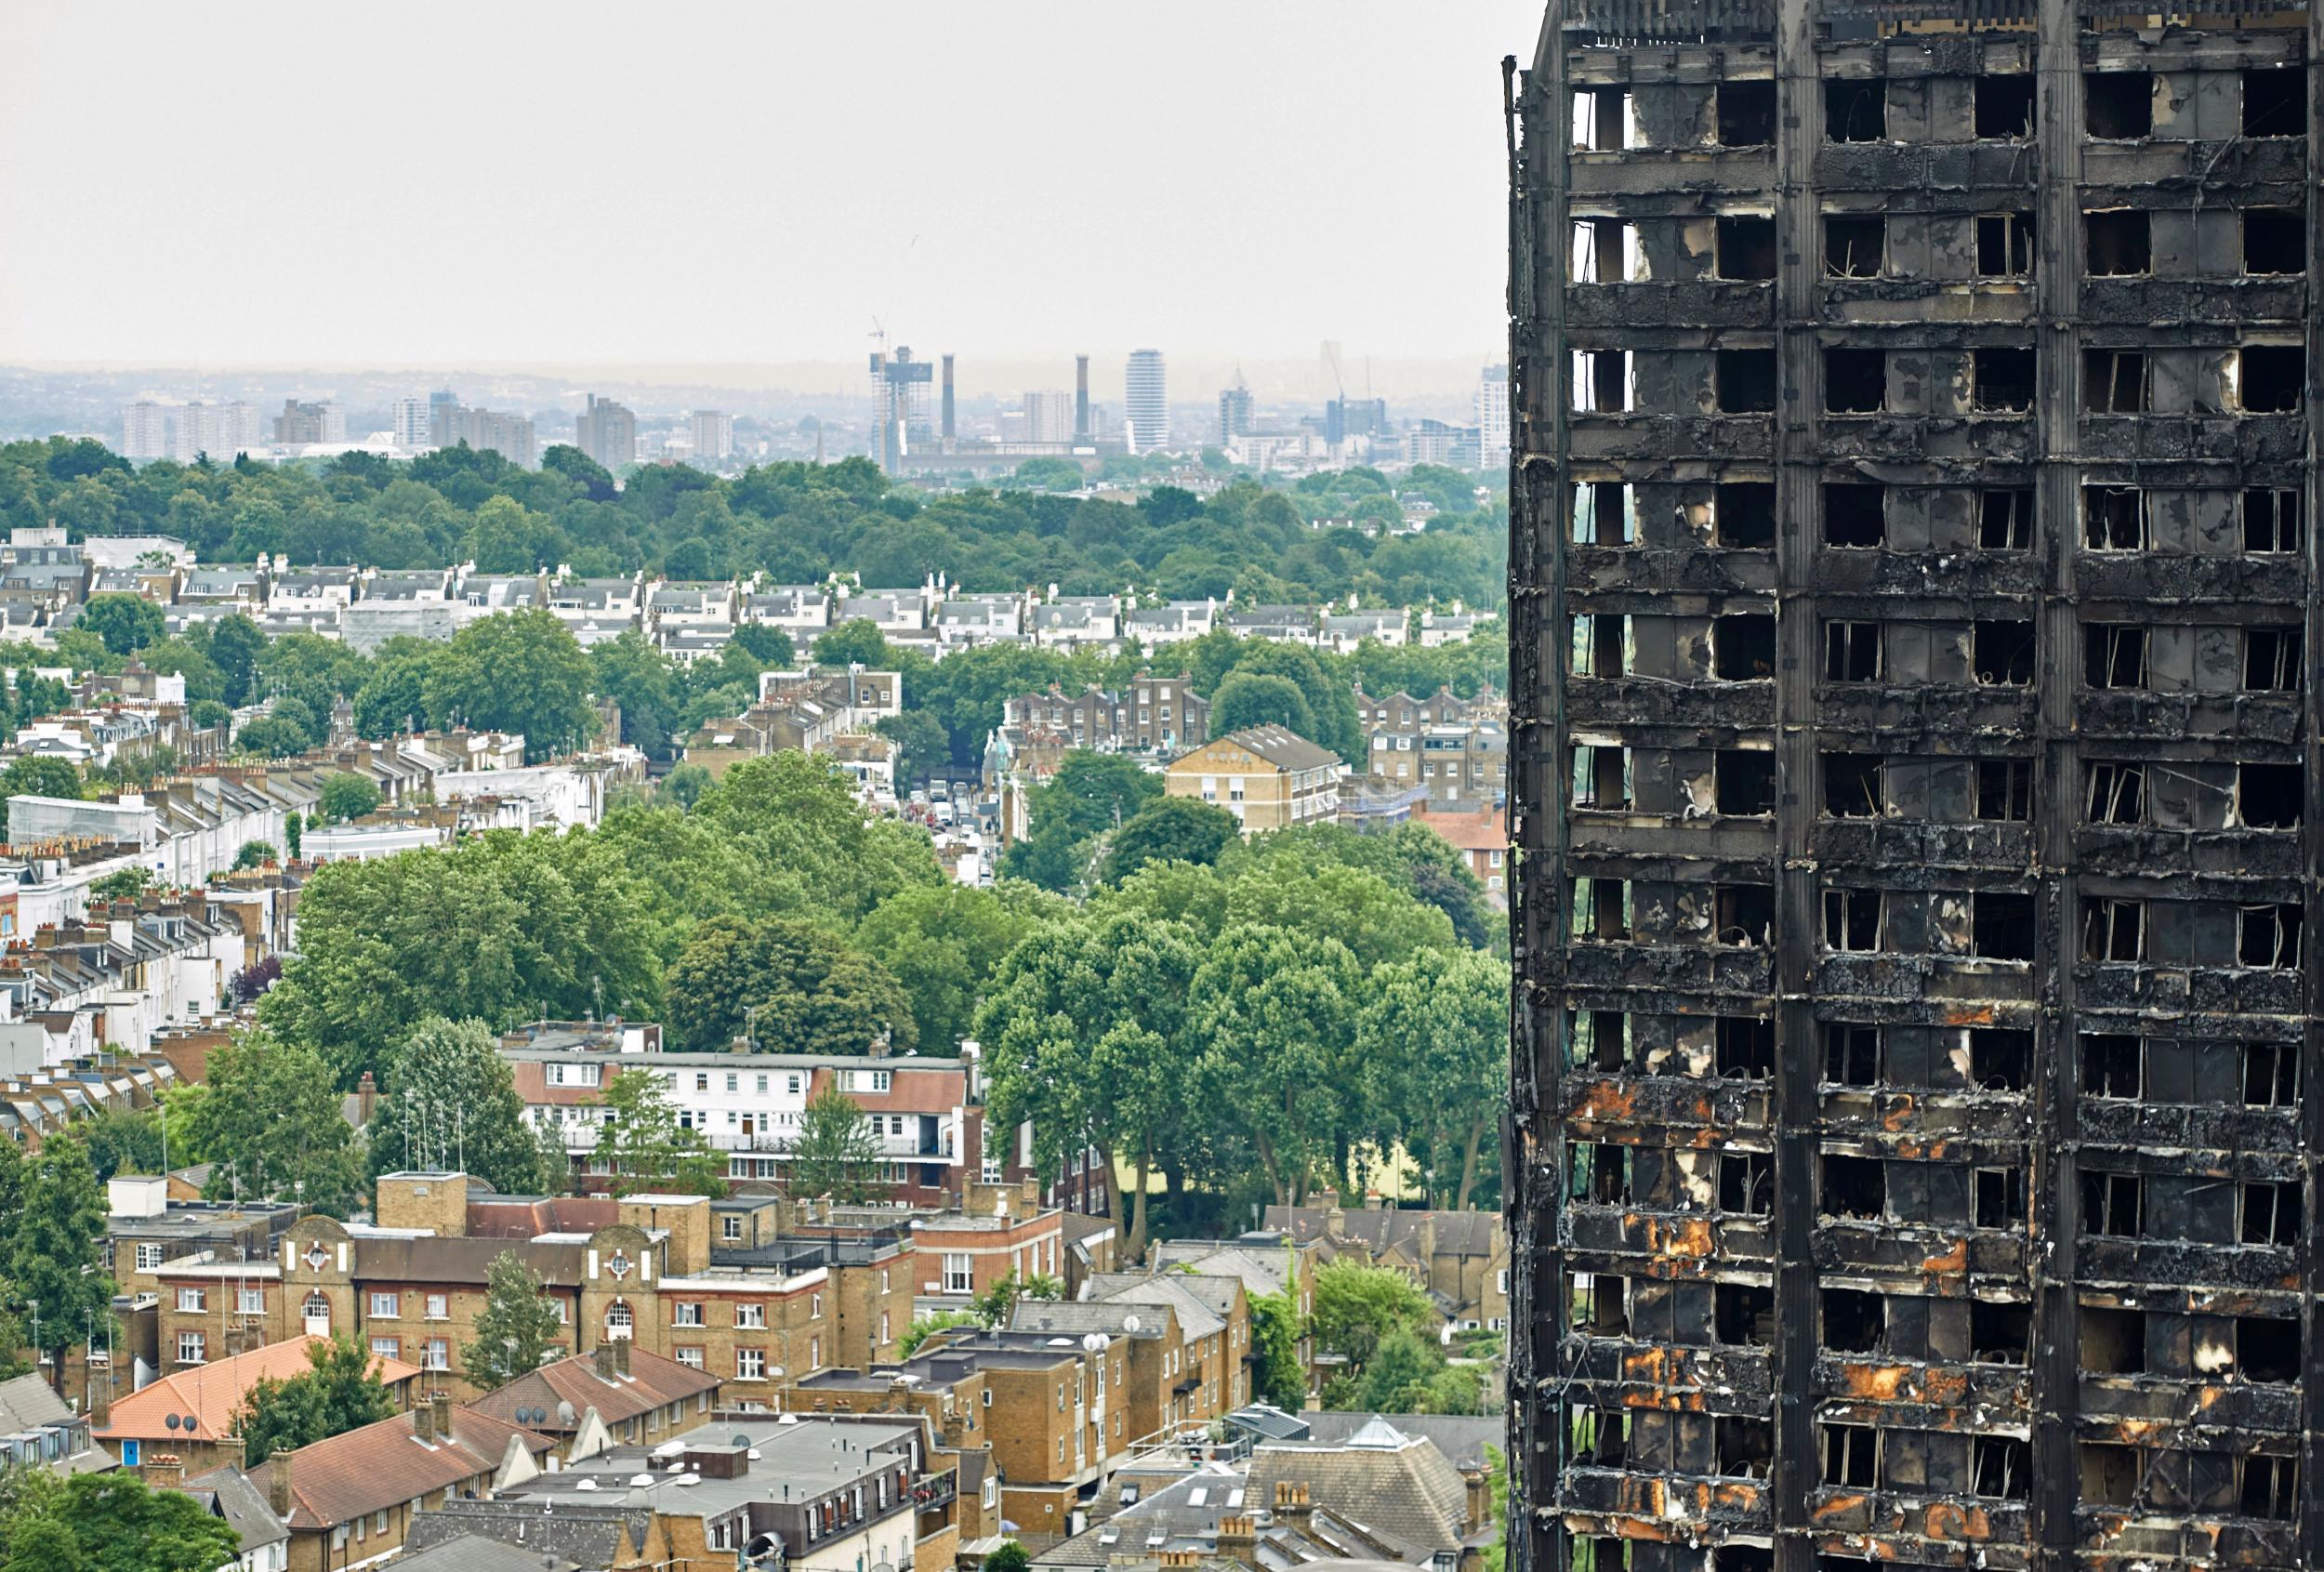 The charred remains of the burnt-out shell of the Grenfell Tower block in north Kensington